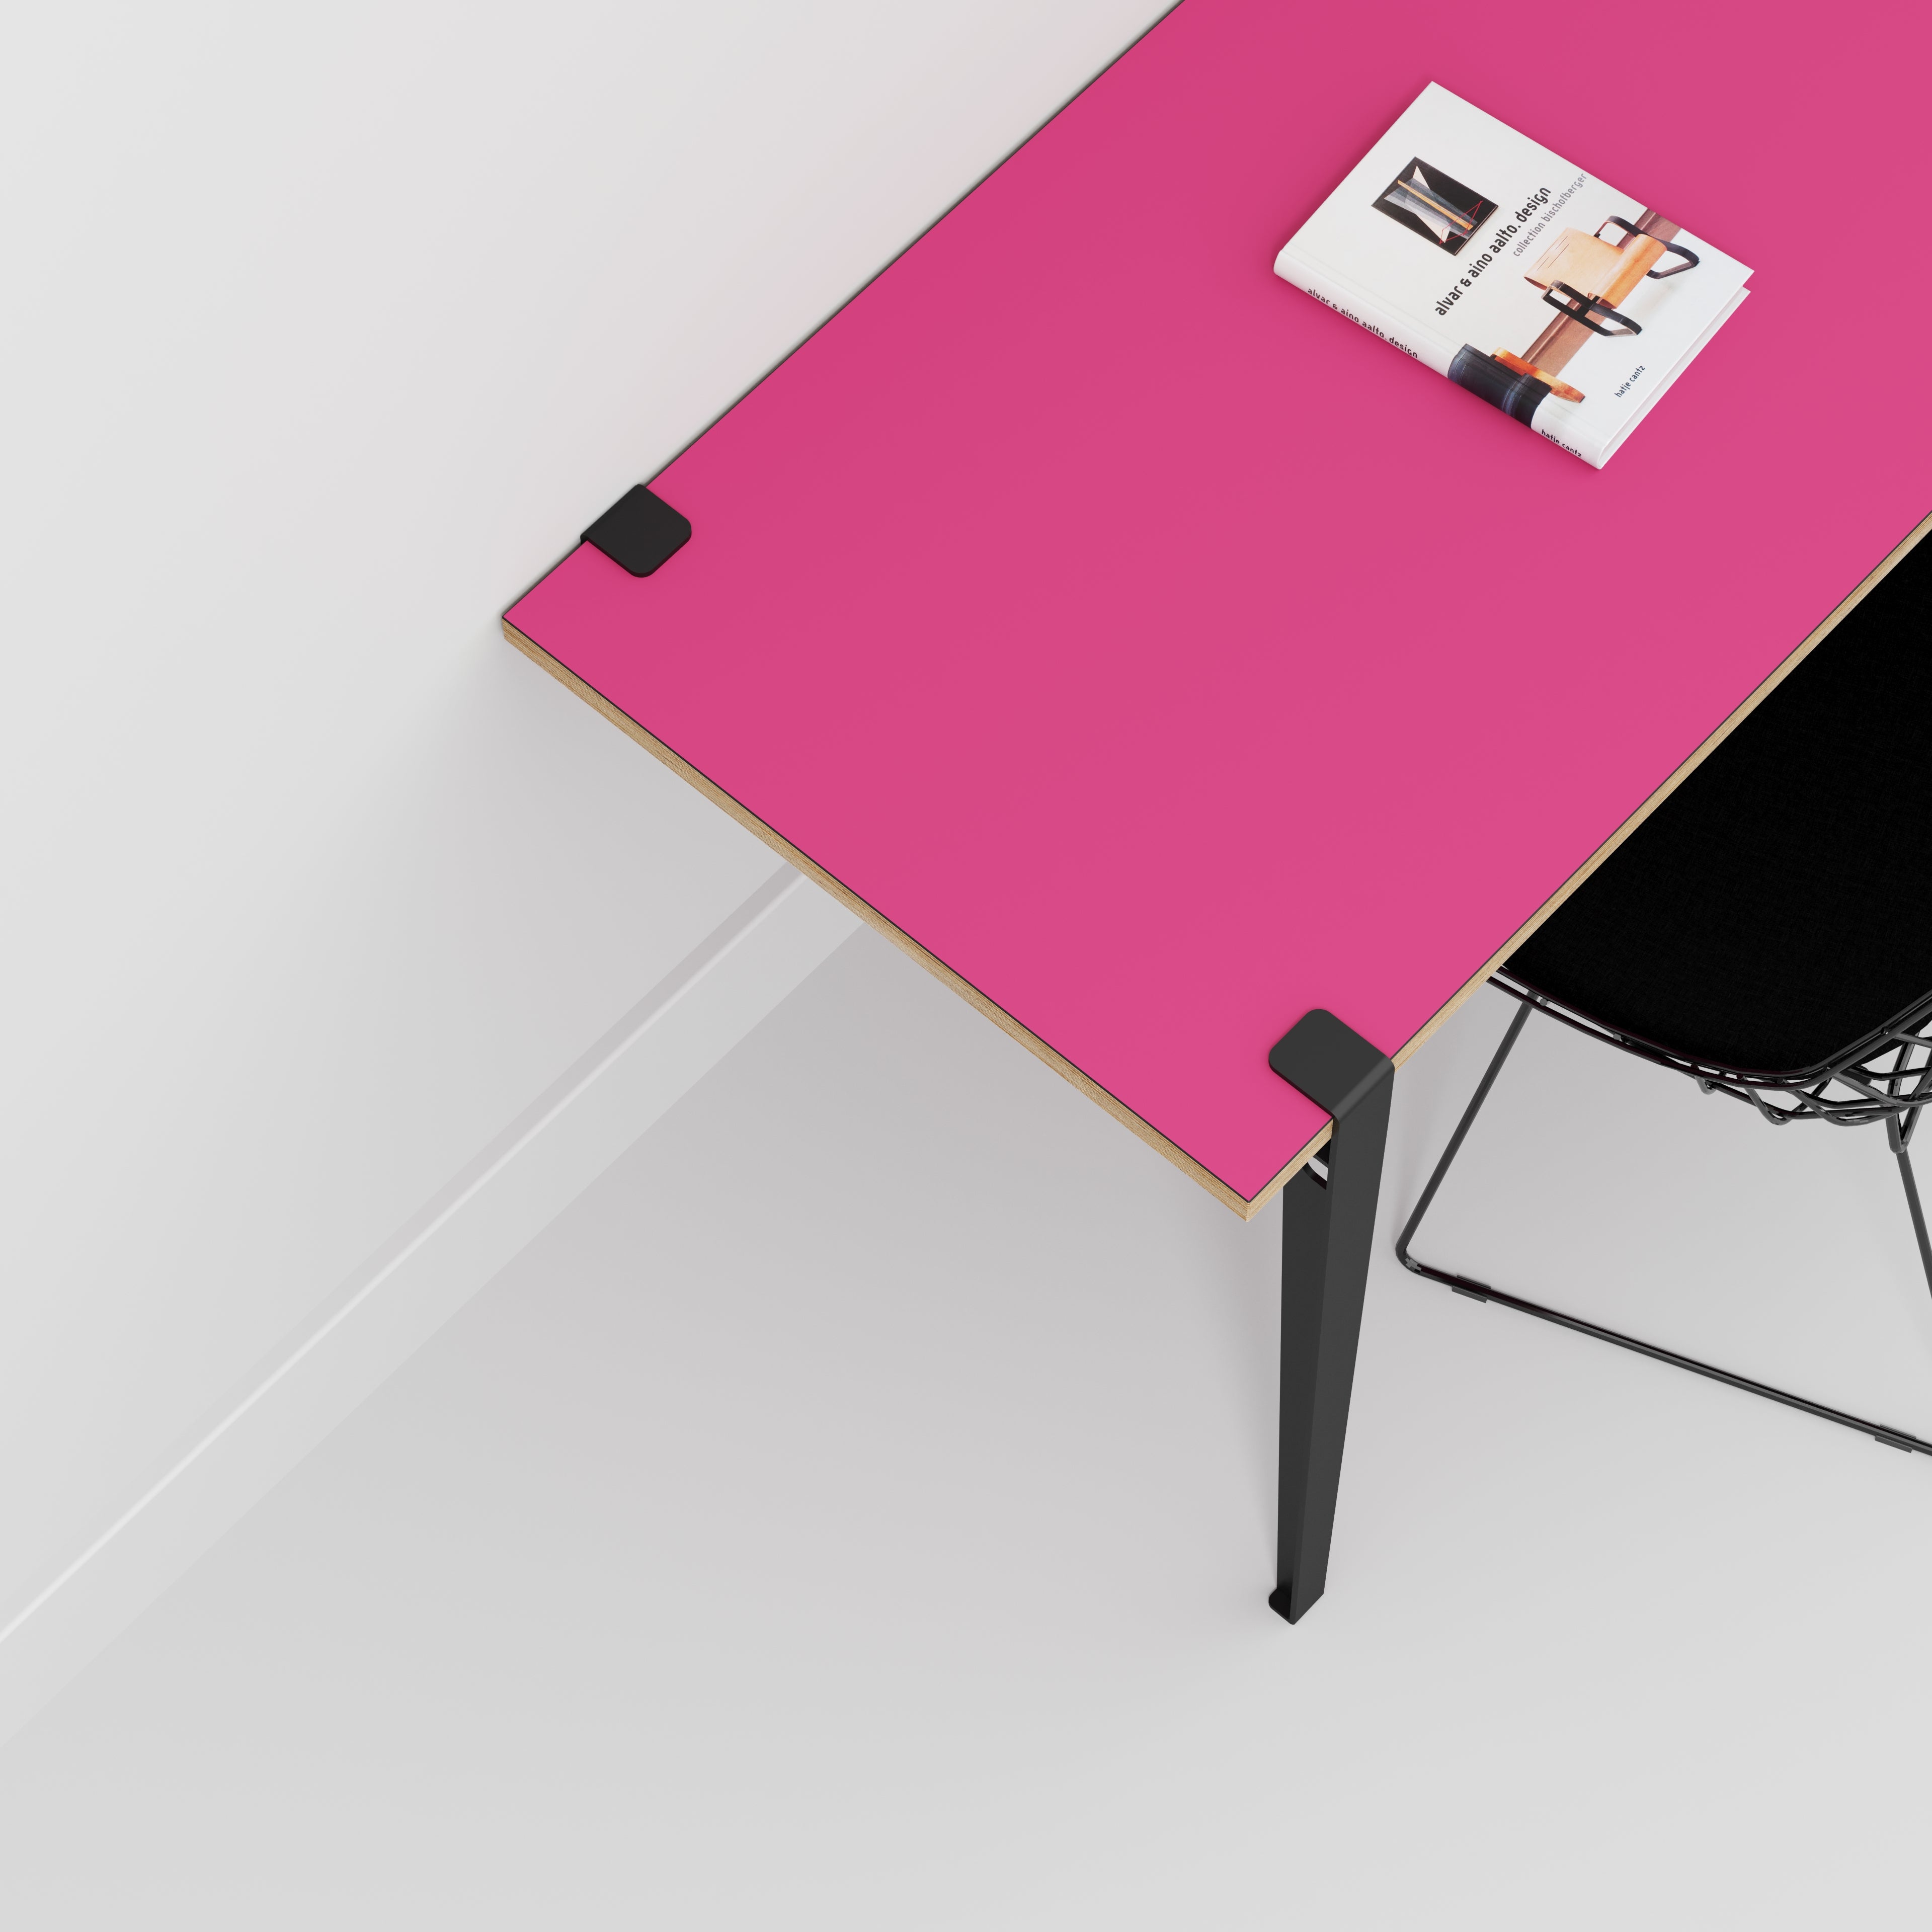 Wall Desk with Black Tiptoe Legs and Brackets - Formica Juicy Pink - 1200(w) x 600(d) x 750(h)